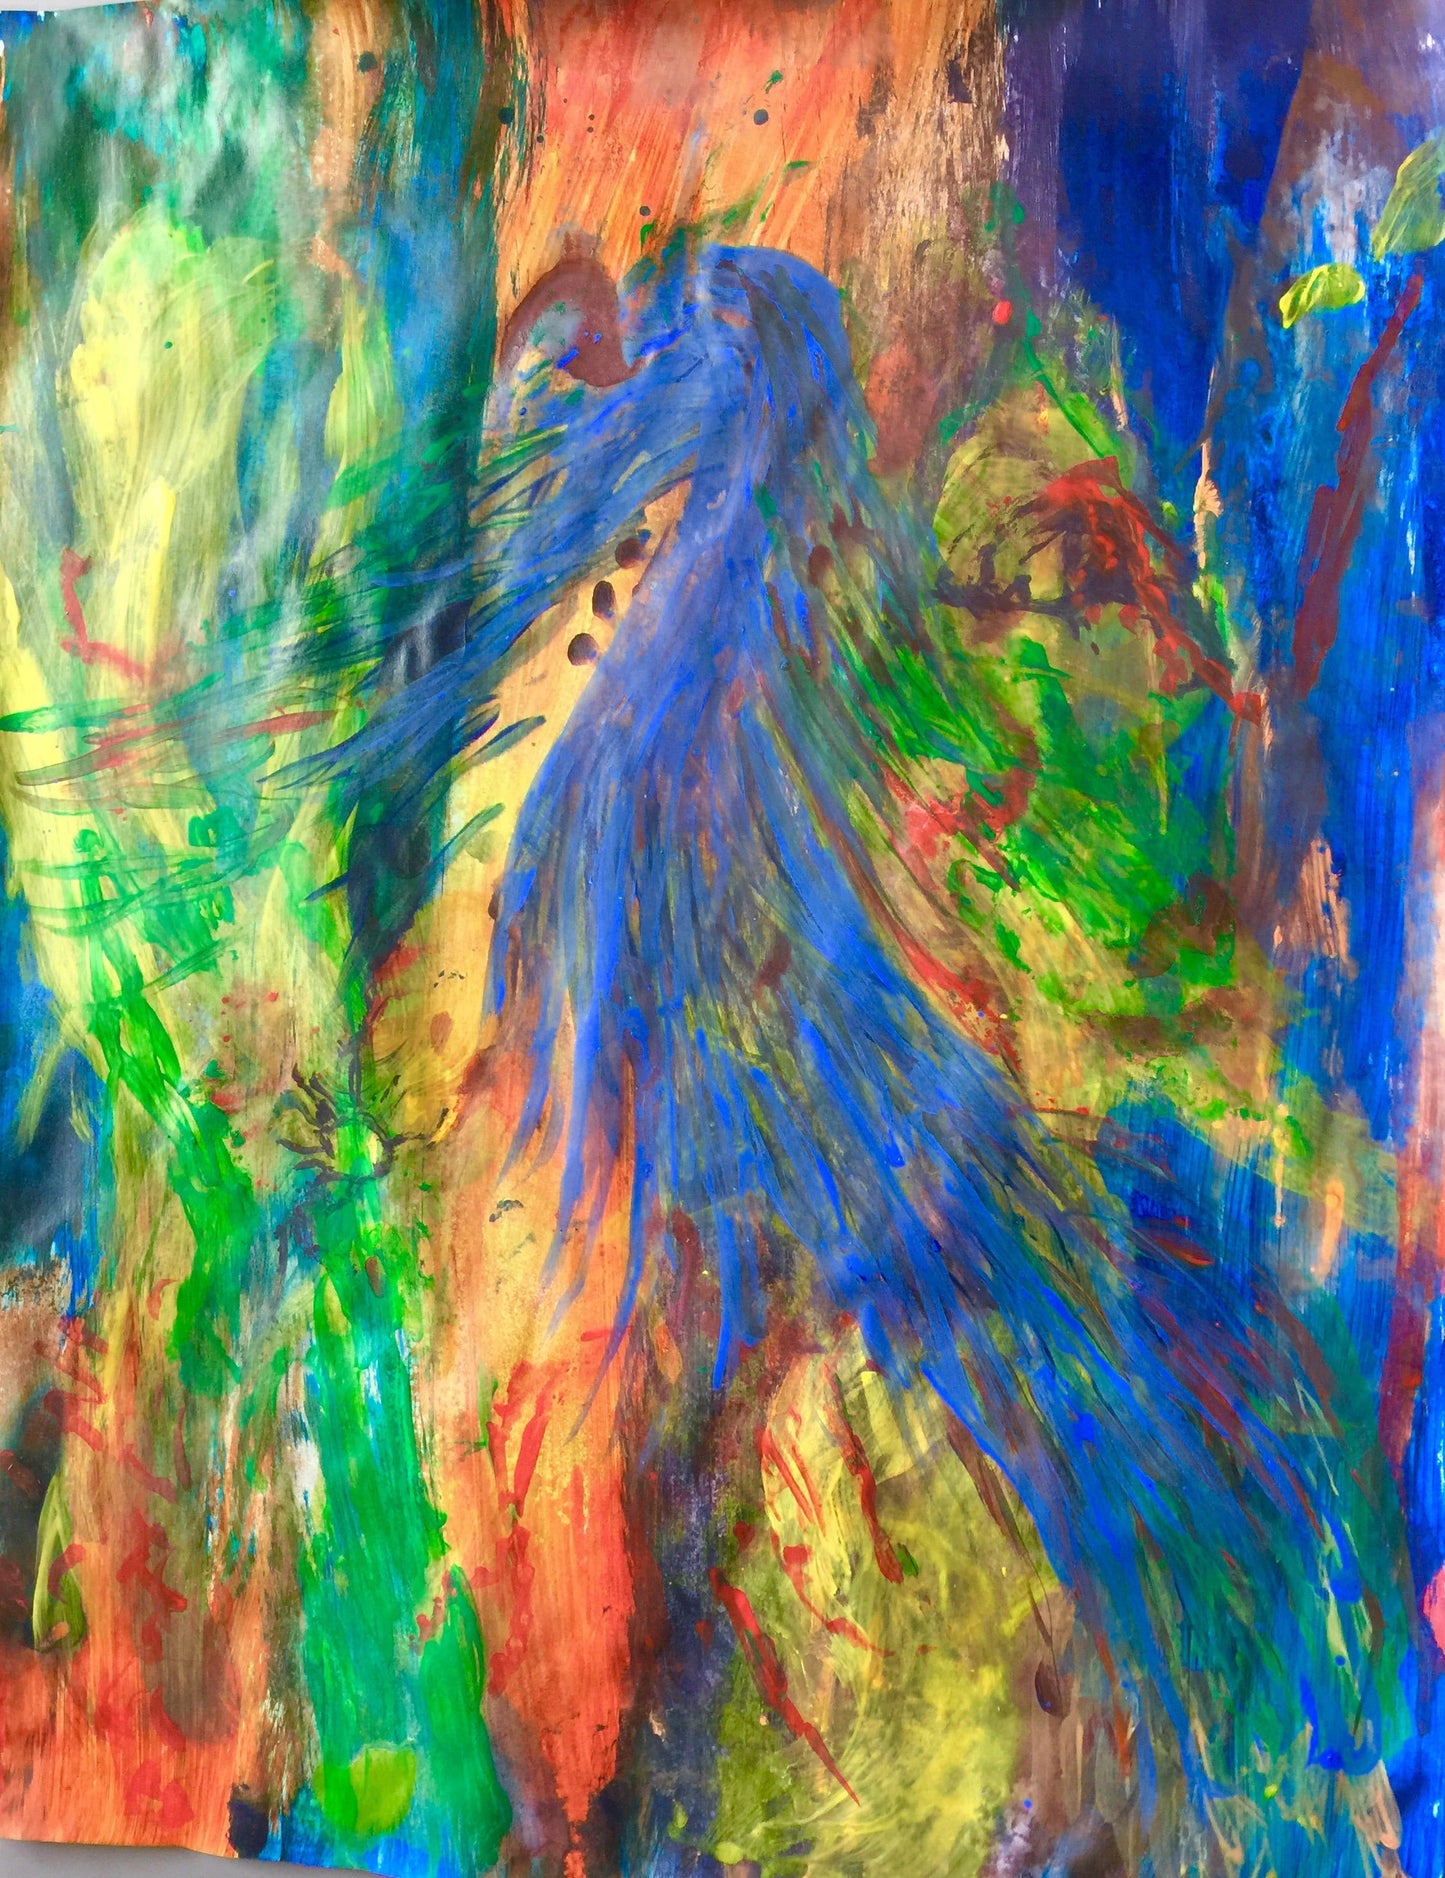 Amazon - Sonarta.com, what a beautiful bird!  Amazon and its colors will cheer up anyone.  This Acrylic On Paper painting  is by Shahla Rahim Reynolds.  It is 36” W X 24” H.  Amazon's copies are printed on premium canvas and are ready to be hung.